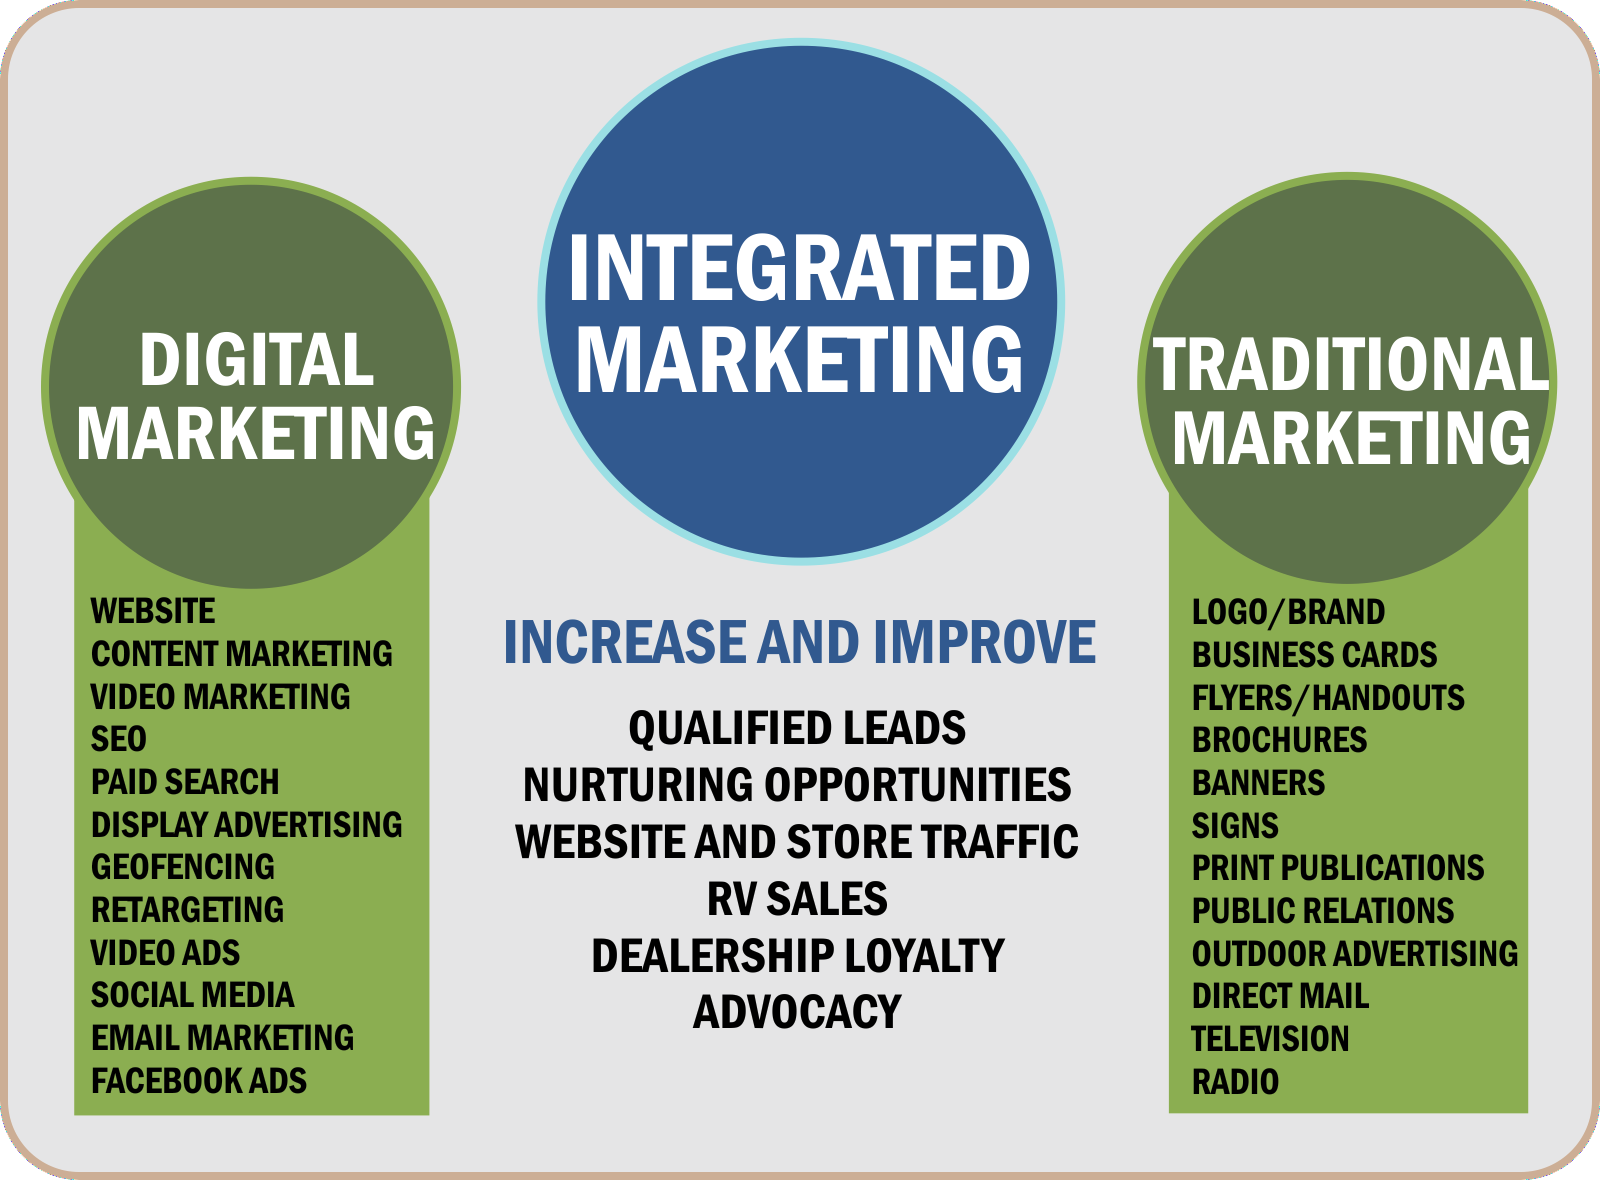 Integrated Marketing Plan gets you better results when implemented properly